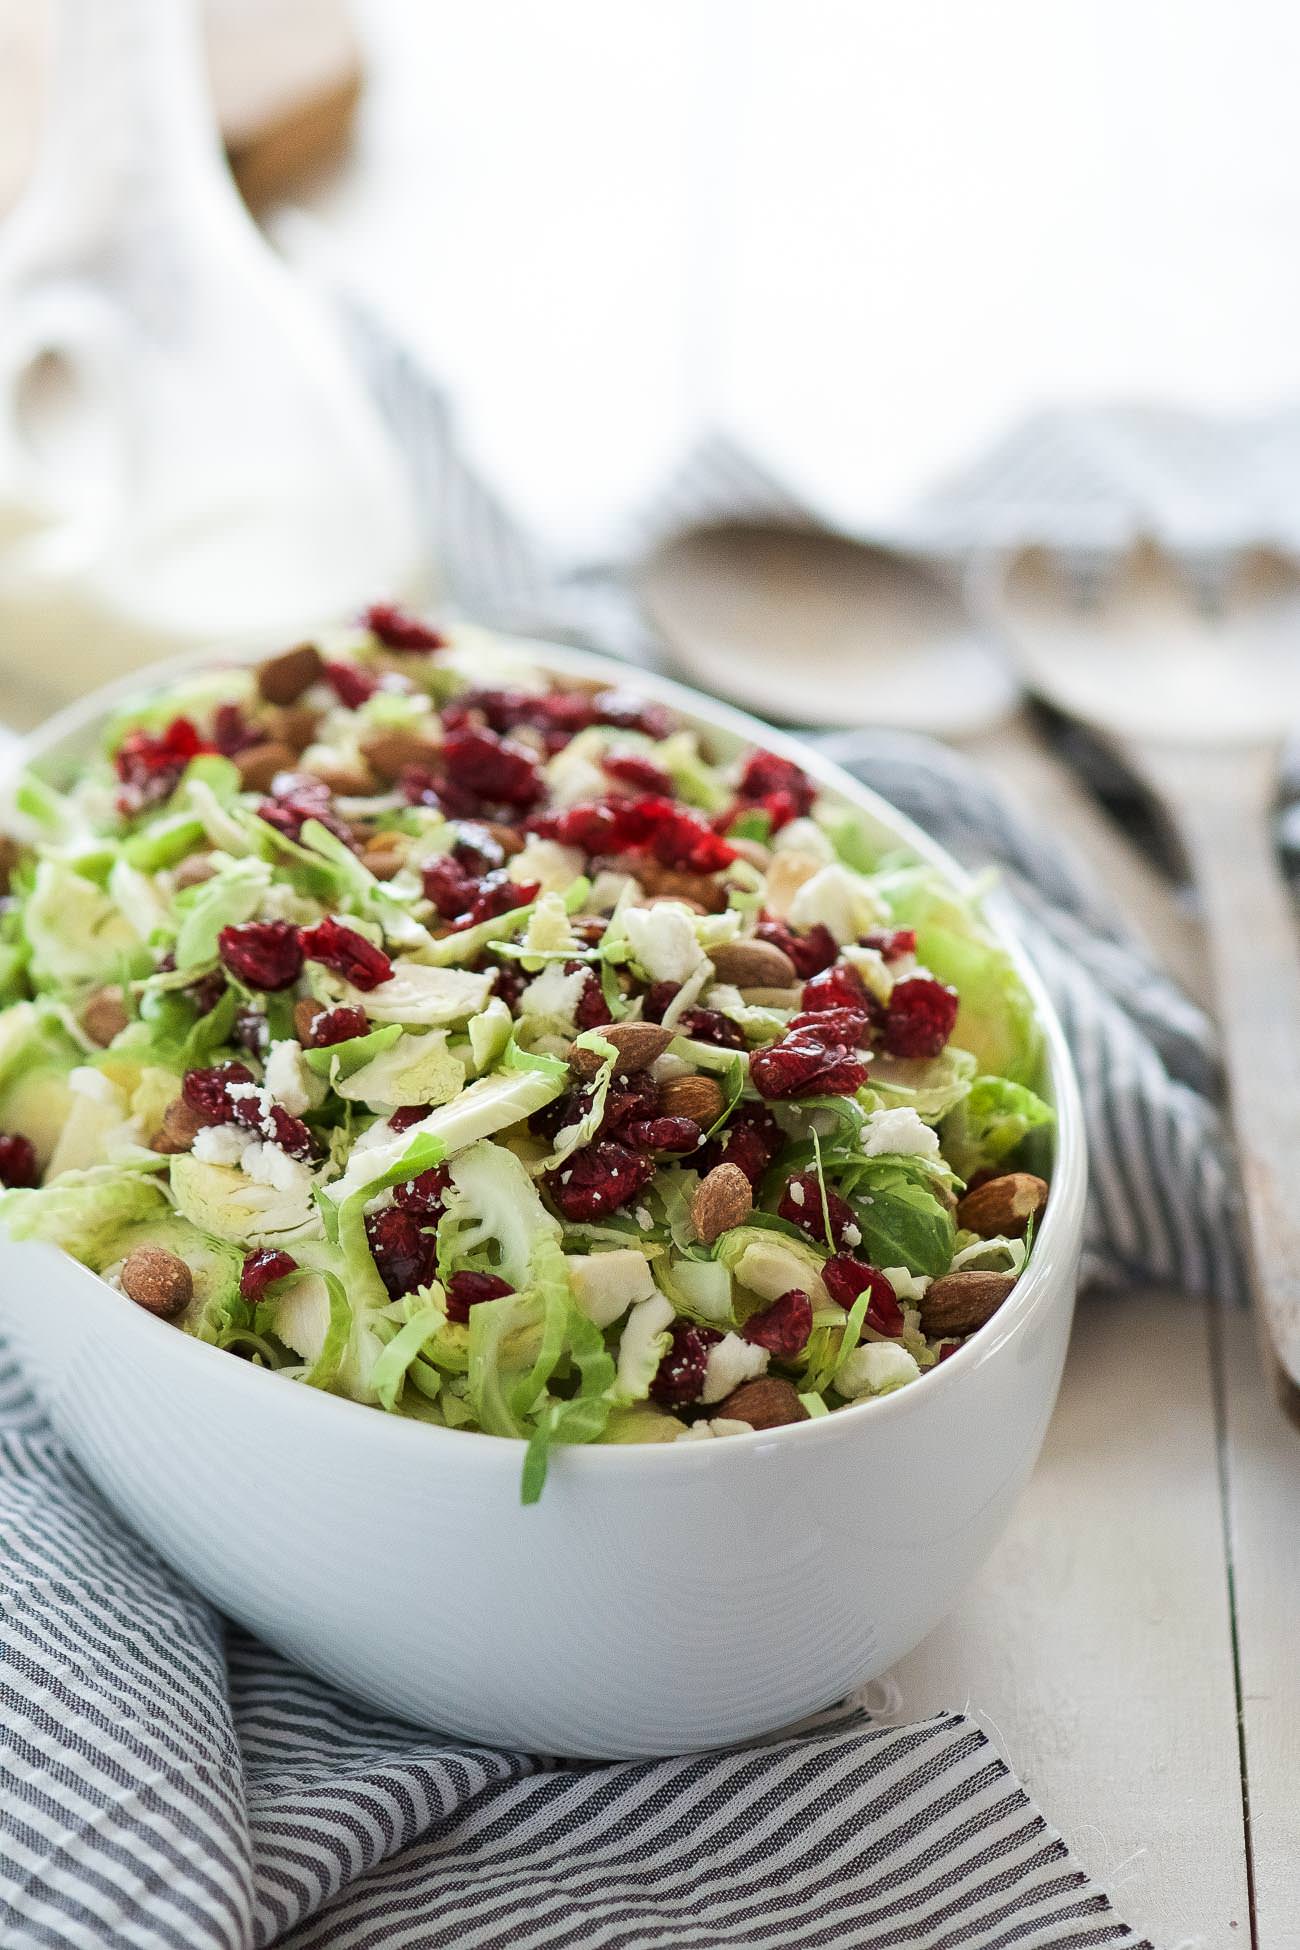 Spring Shaved Brussels Sprout Salad with Lemon Poppyseed Dressing is a fast and light salad that is full of tart cranberries, creamy goat cheese and salty almonds! And tossed in a flavorful, homemade citrus poppyseed dressing!